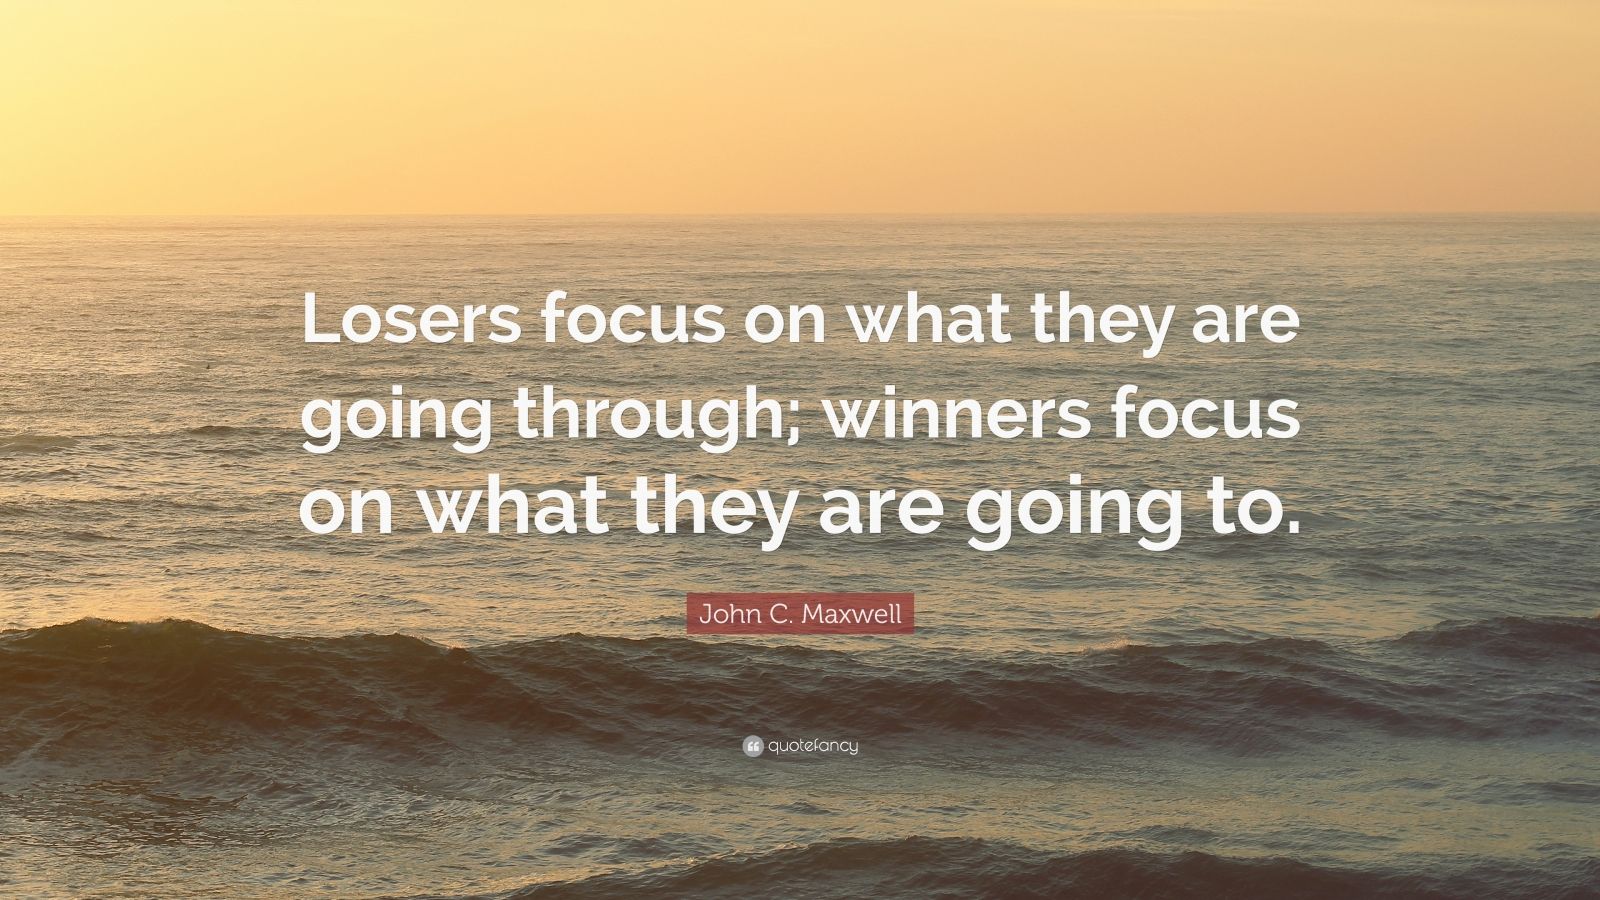 John C. Maxwell Quote: "Losers focus on what they are ...